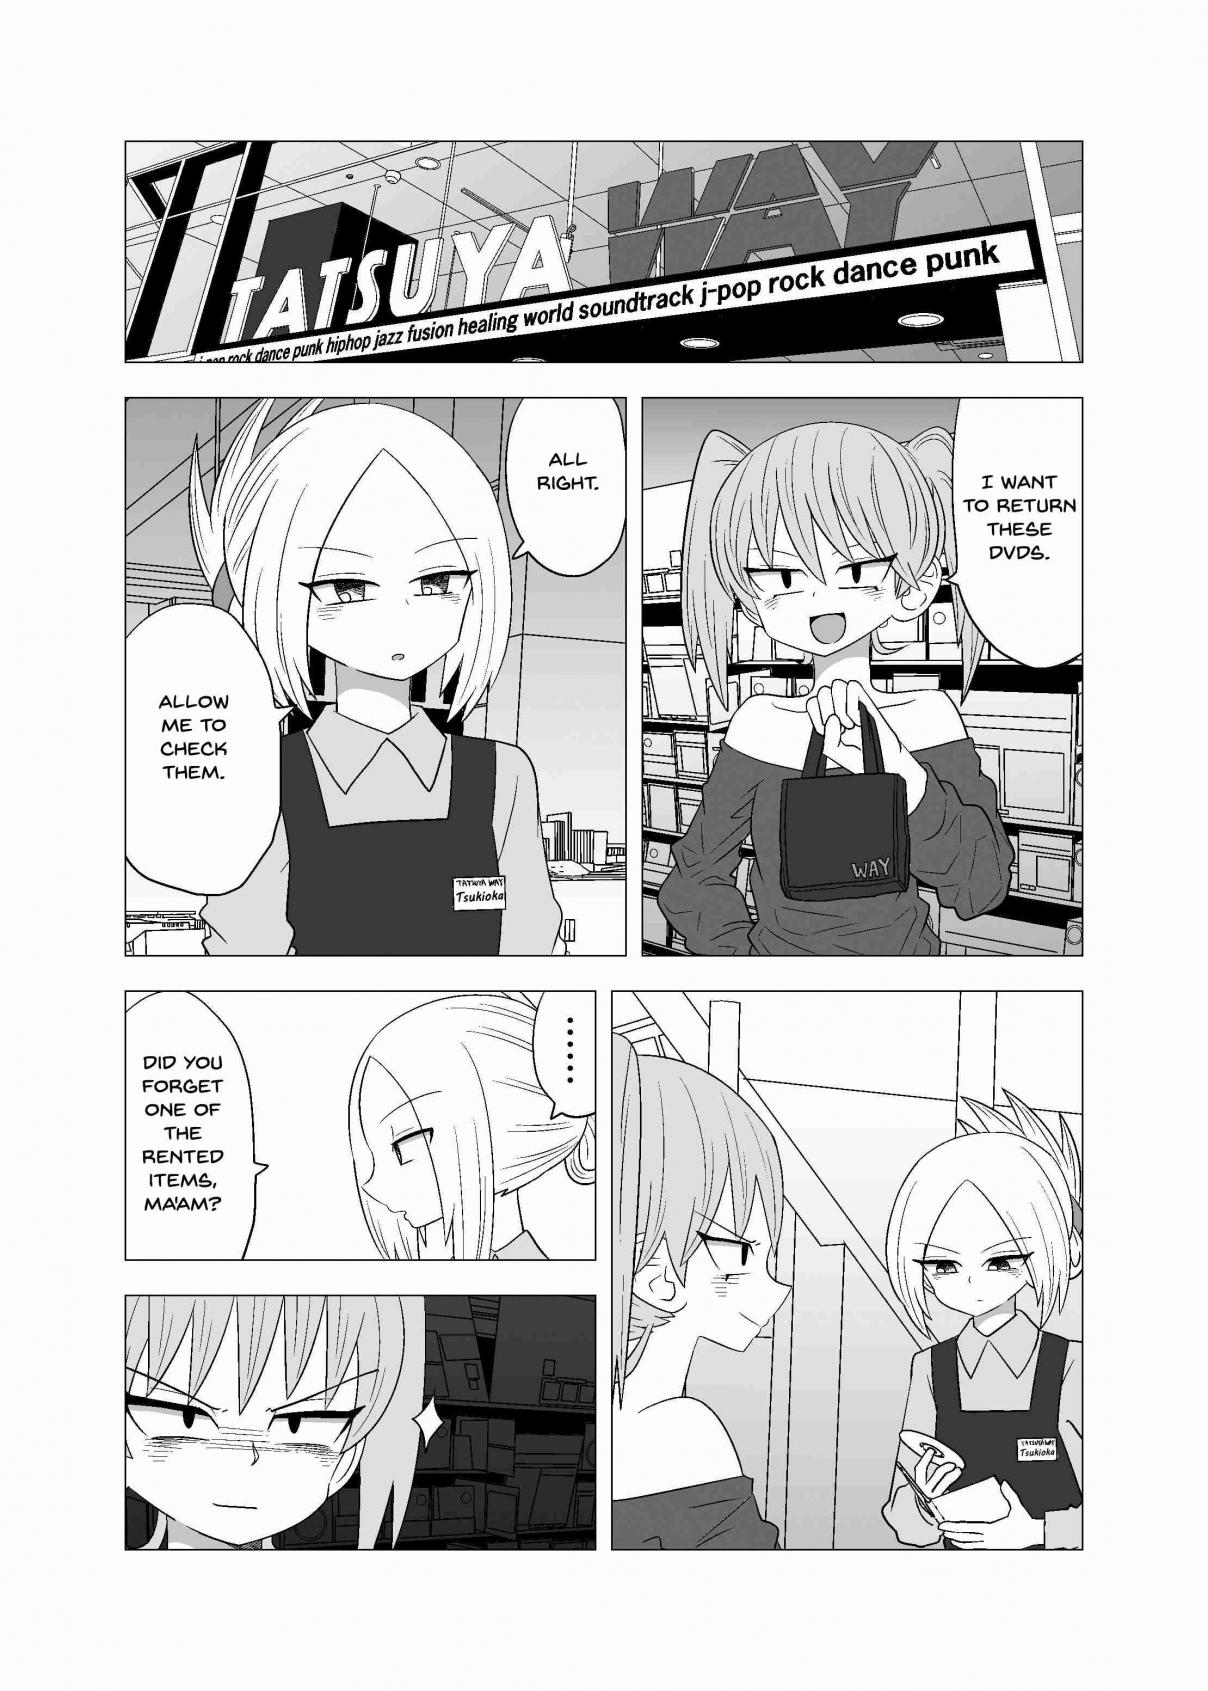 Video Rental Shop Ch. 10 A Girl Wants A Girl from the Video Rental Shop to Read Erotic DVD Titles